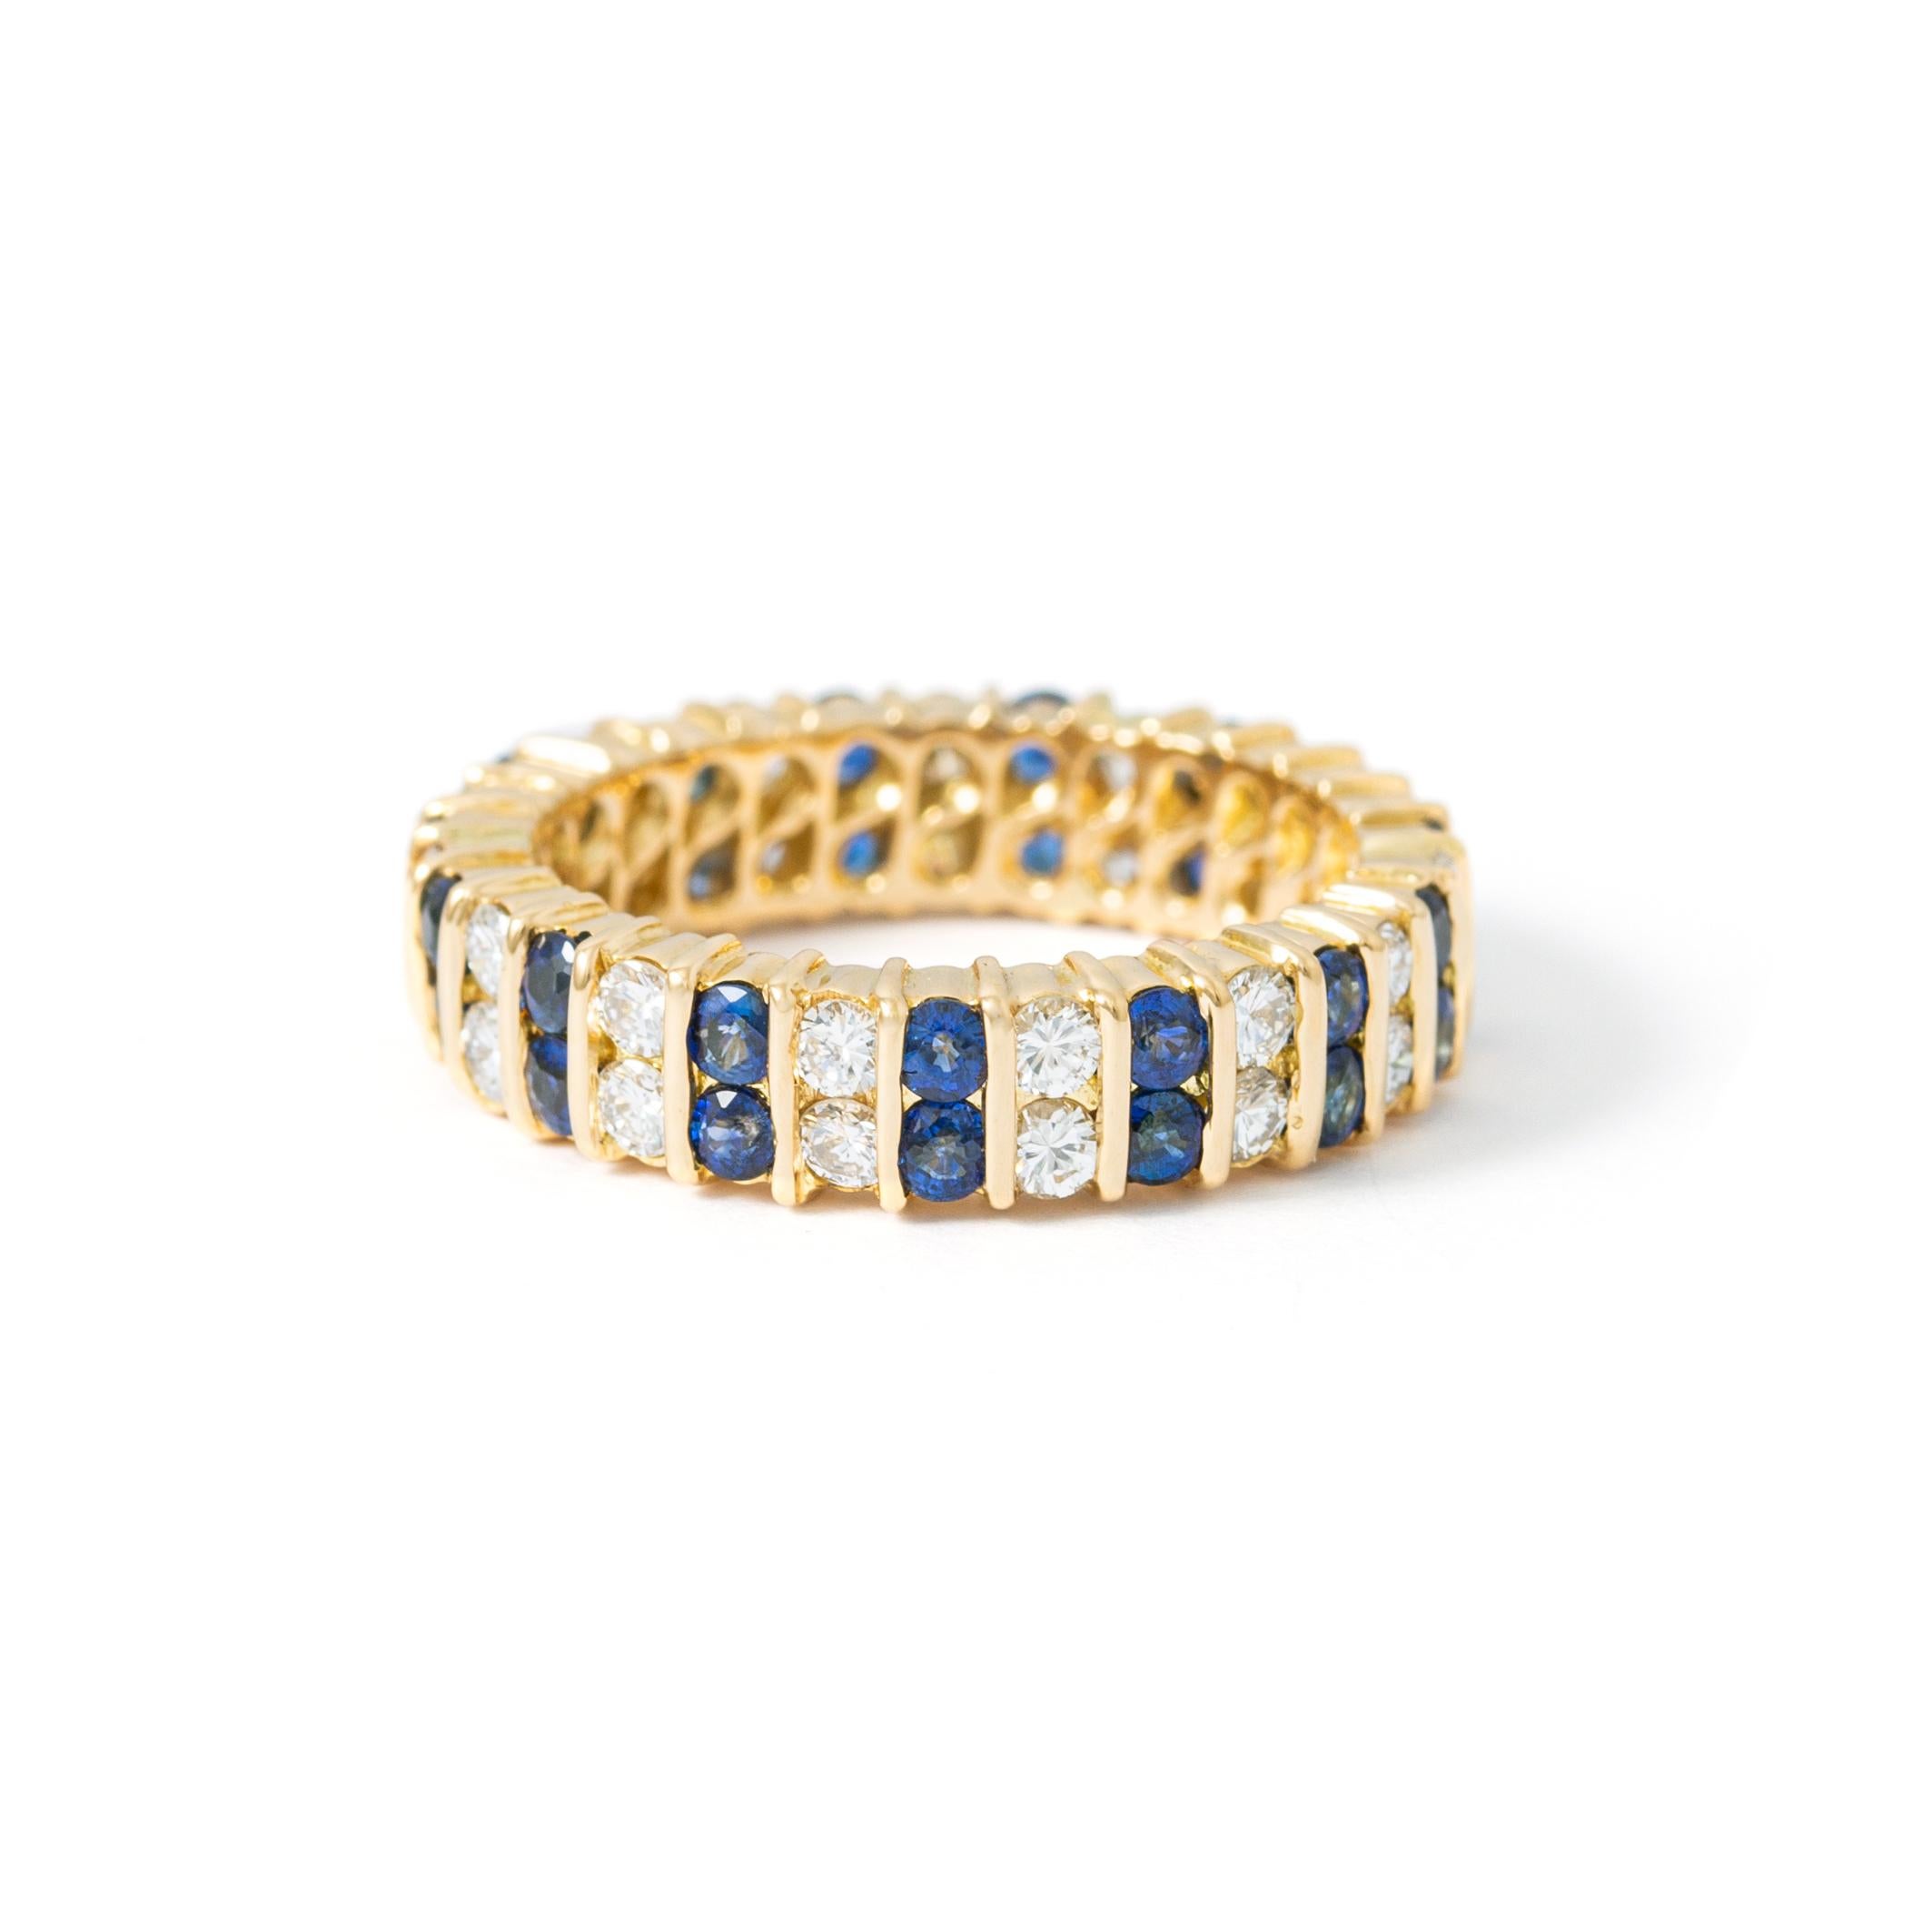 Ring in 18kt yellow gold set with diamonds 0.93 cts and sapphires 1.46 cts Size 50